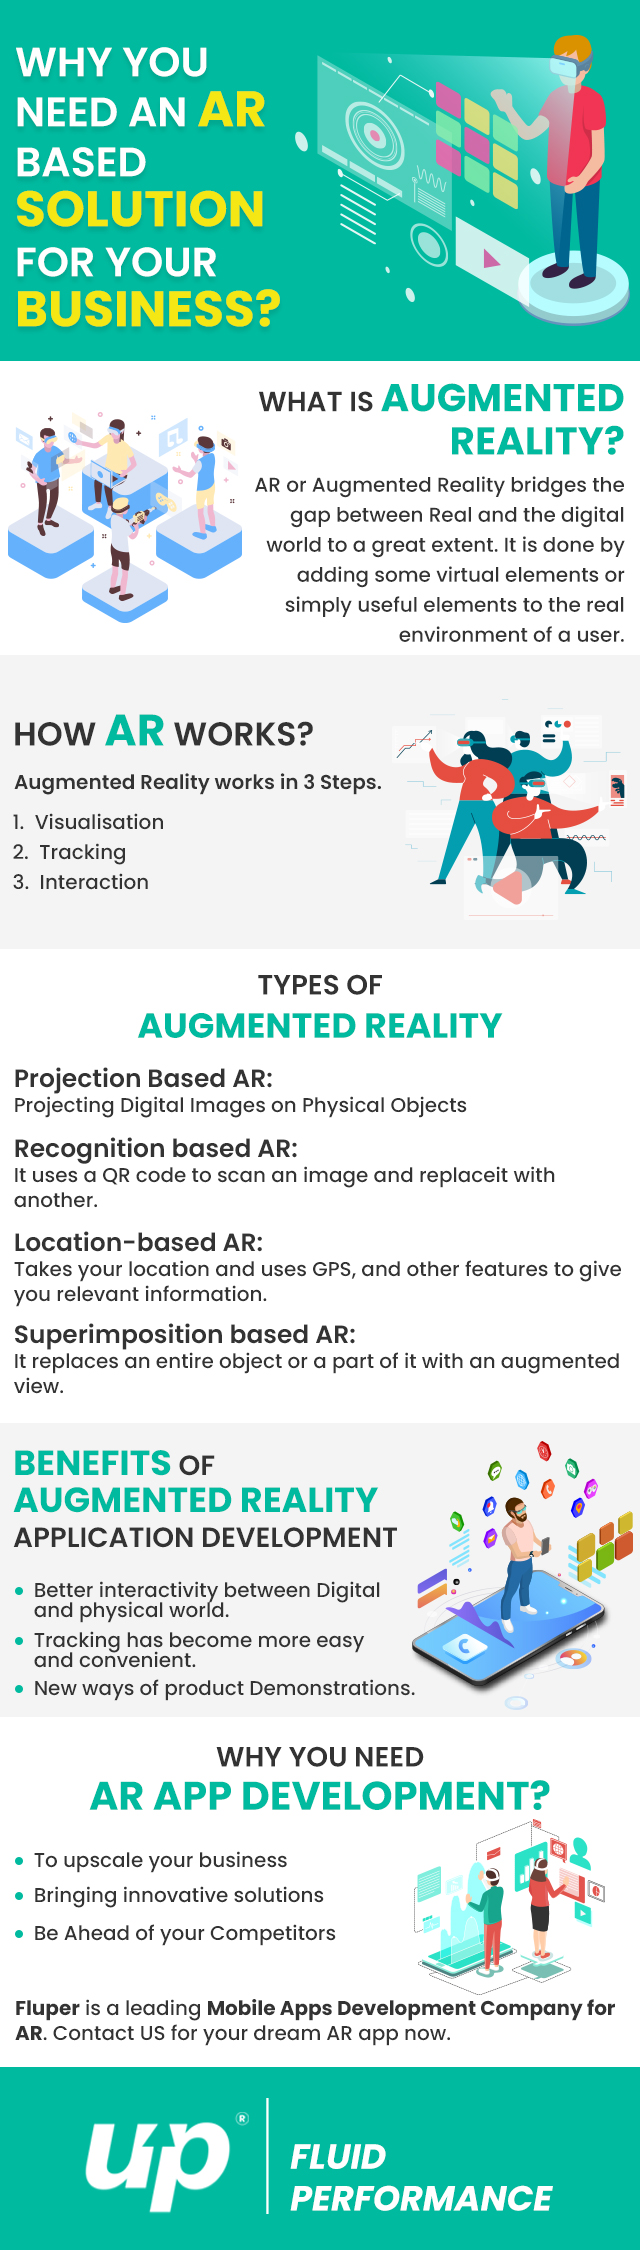 Augmented Reality is Important for Mobile App Development